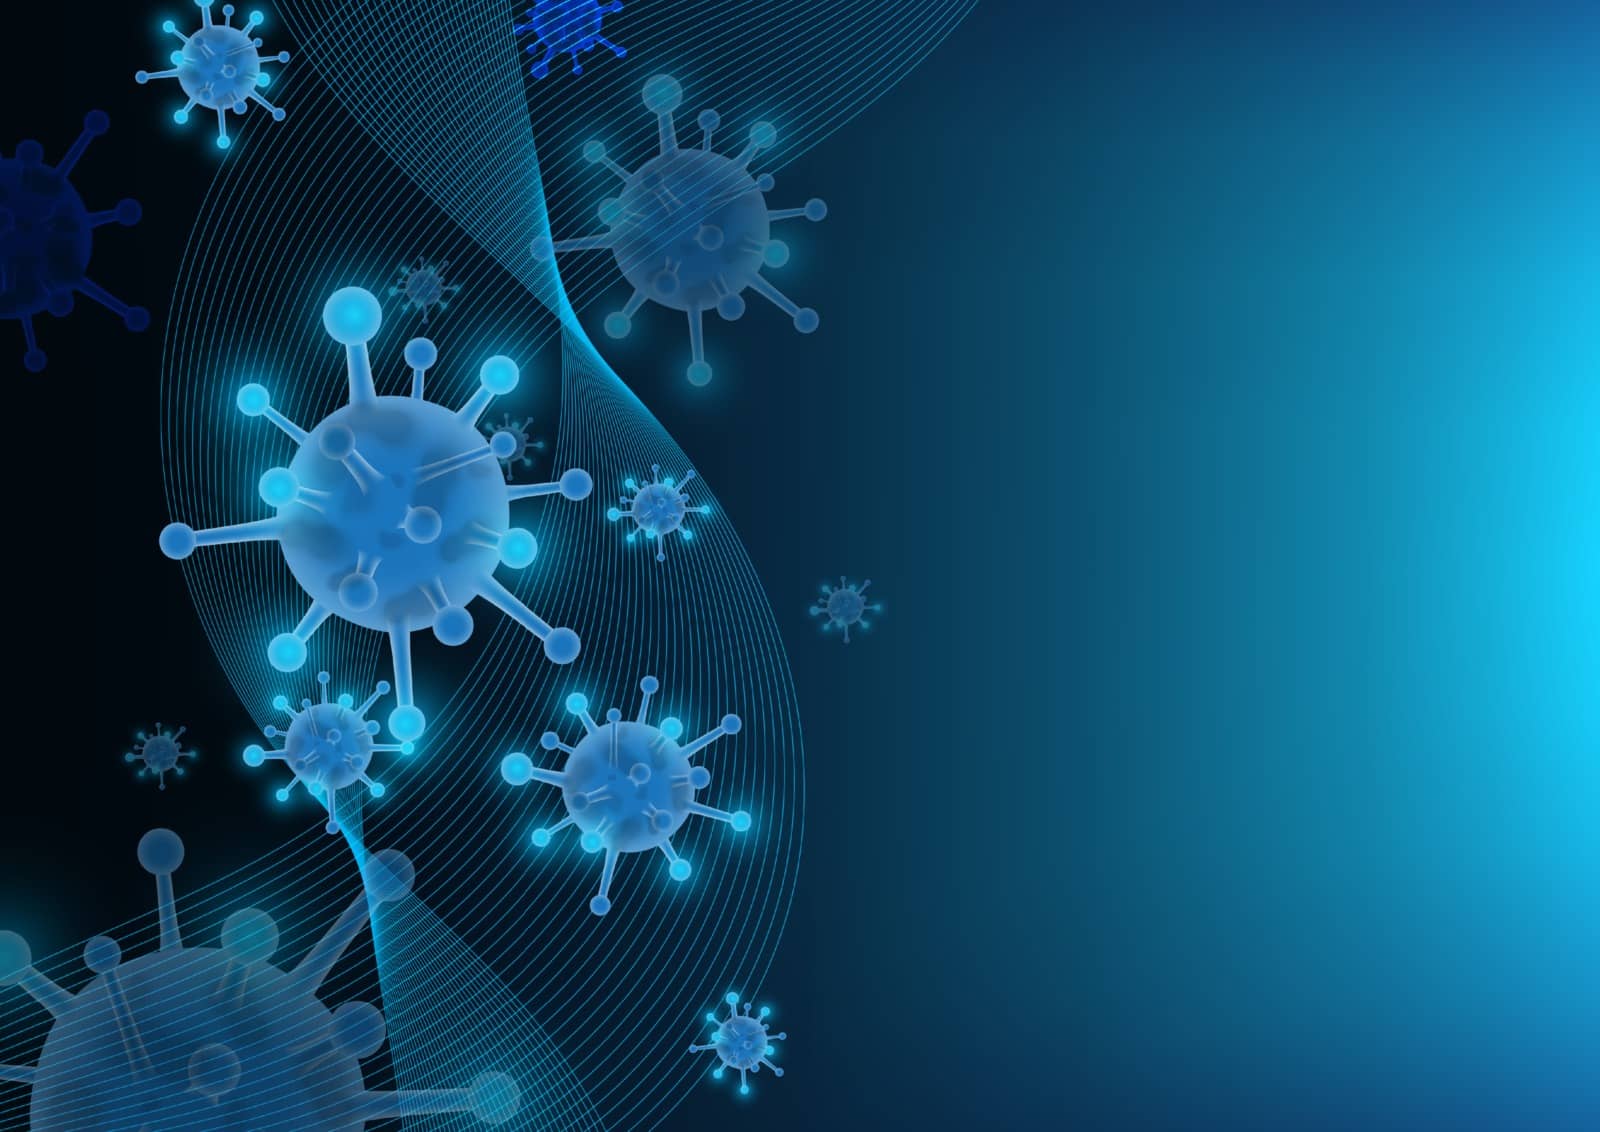 Virus COVID-19 background and Dangerous cells by Foryou13